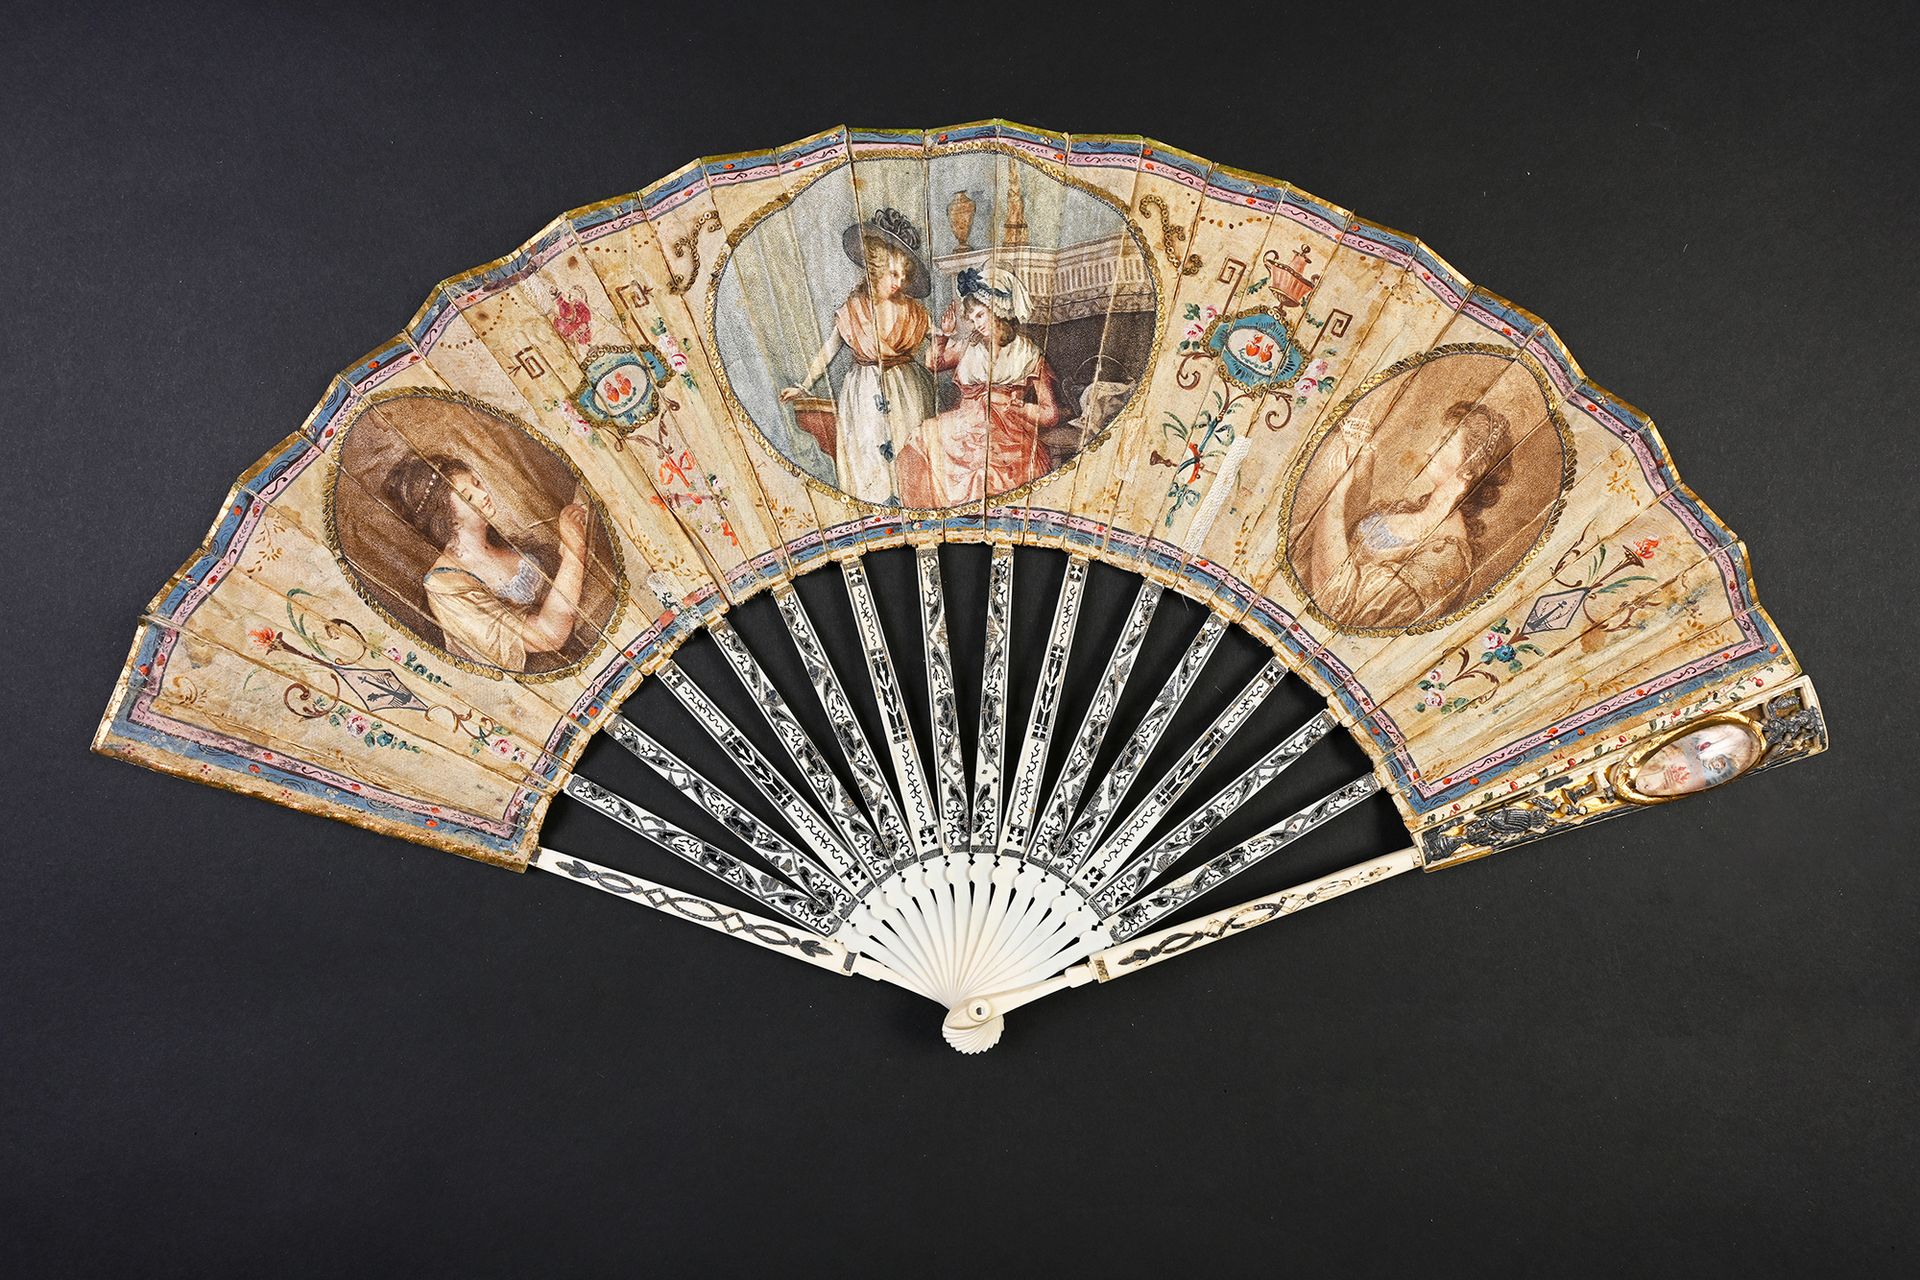 Null Animations in miniature, ca. 1780
Folded fan, the silk sheet decorated with&hellip;